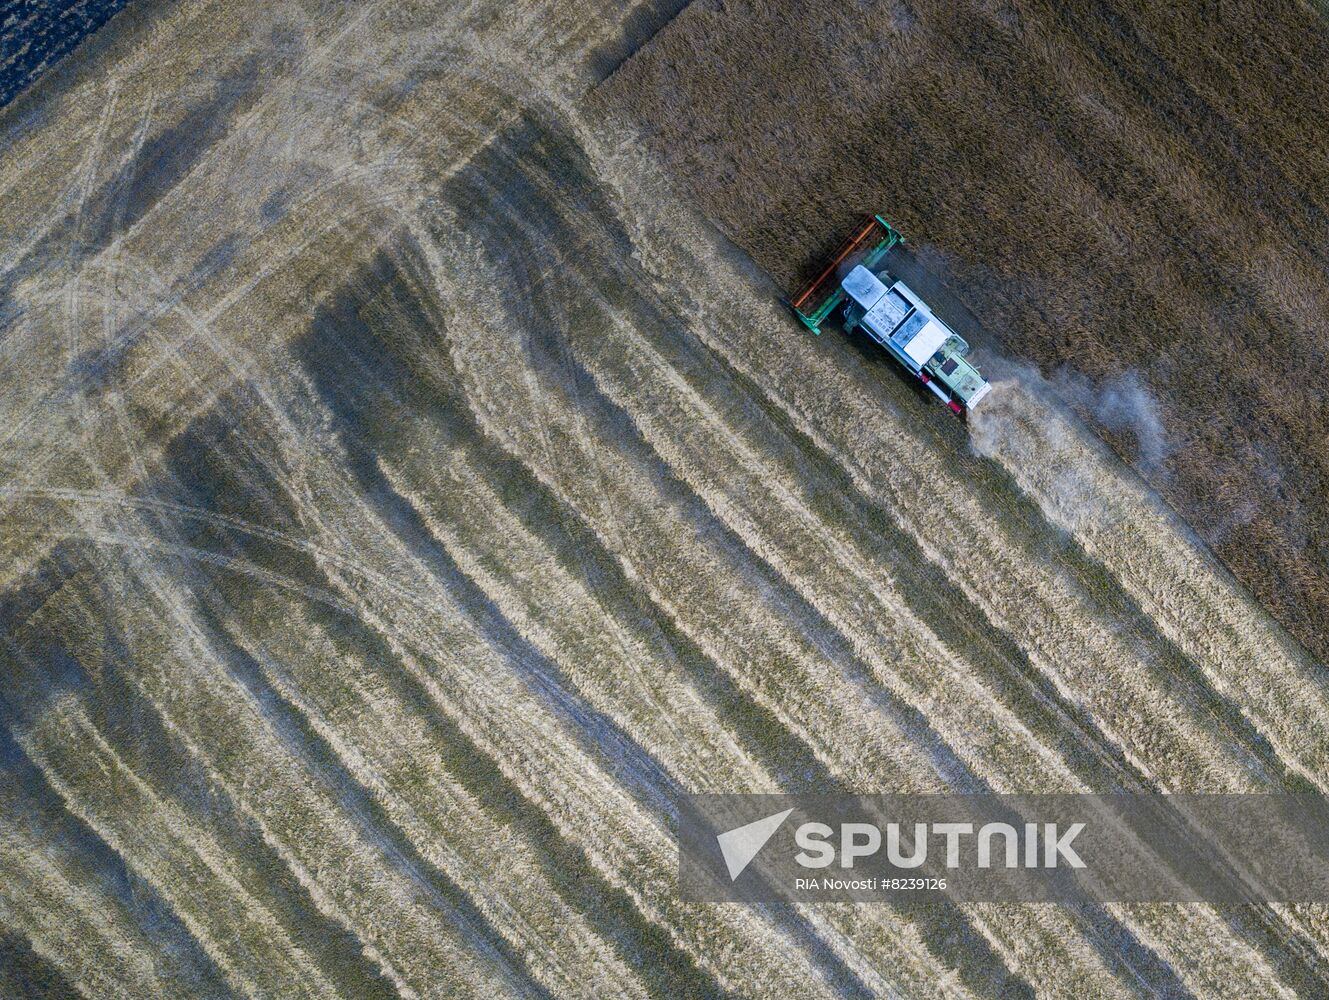 DPR Agriculture Wheat Harvesting